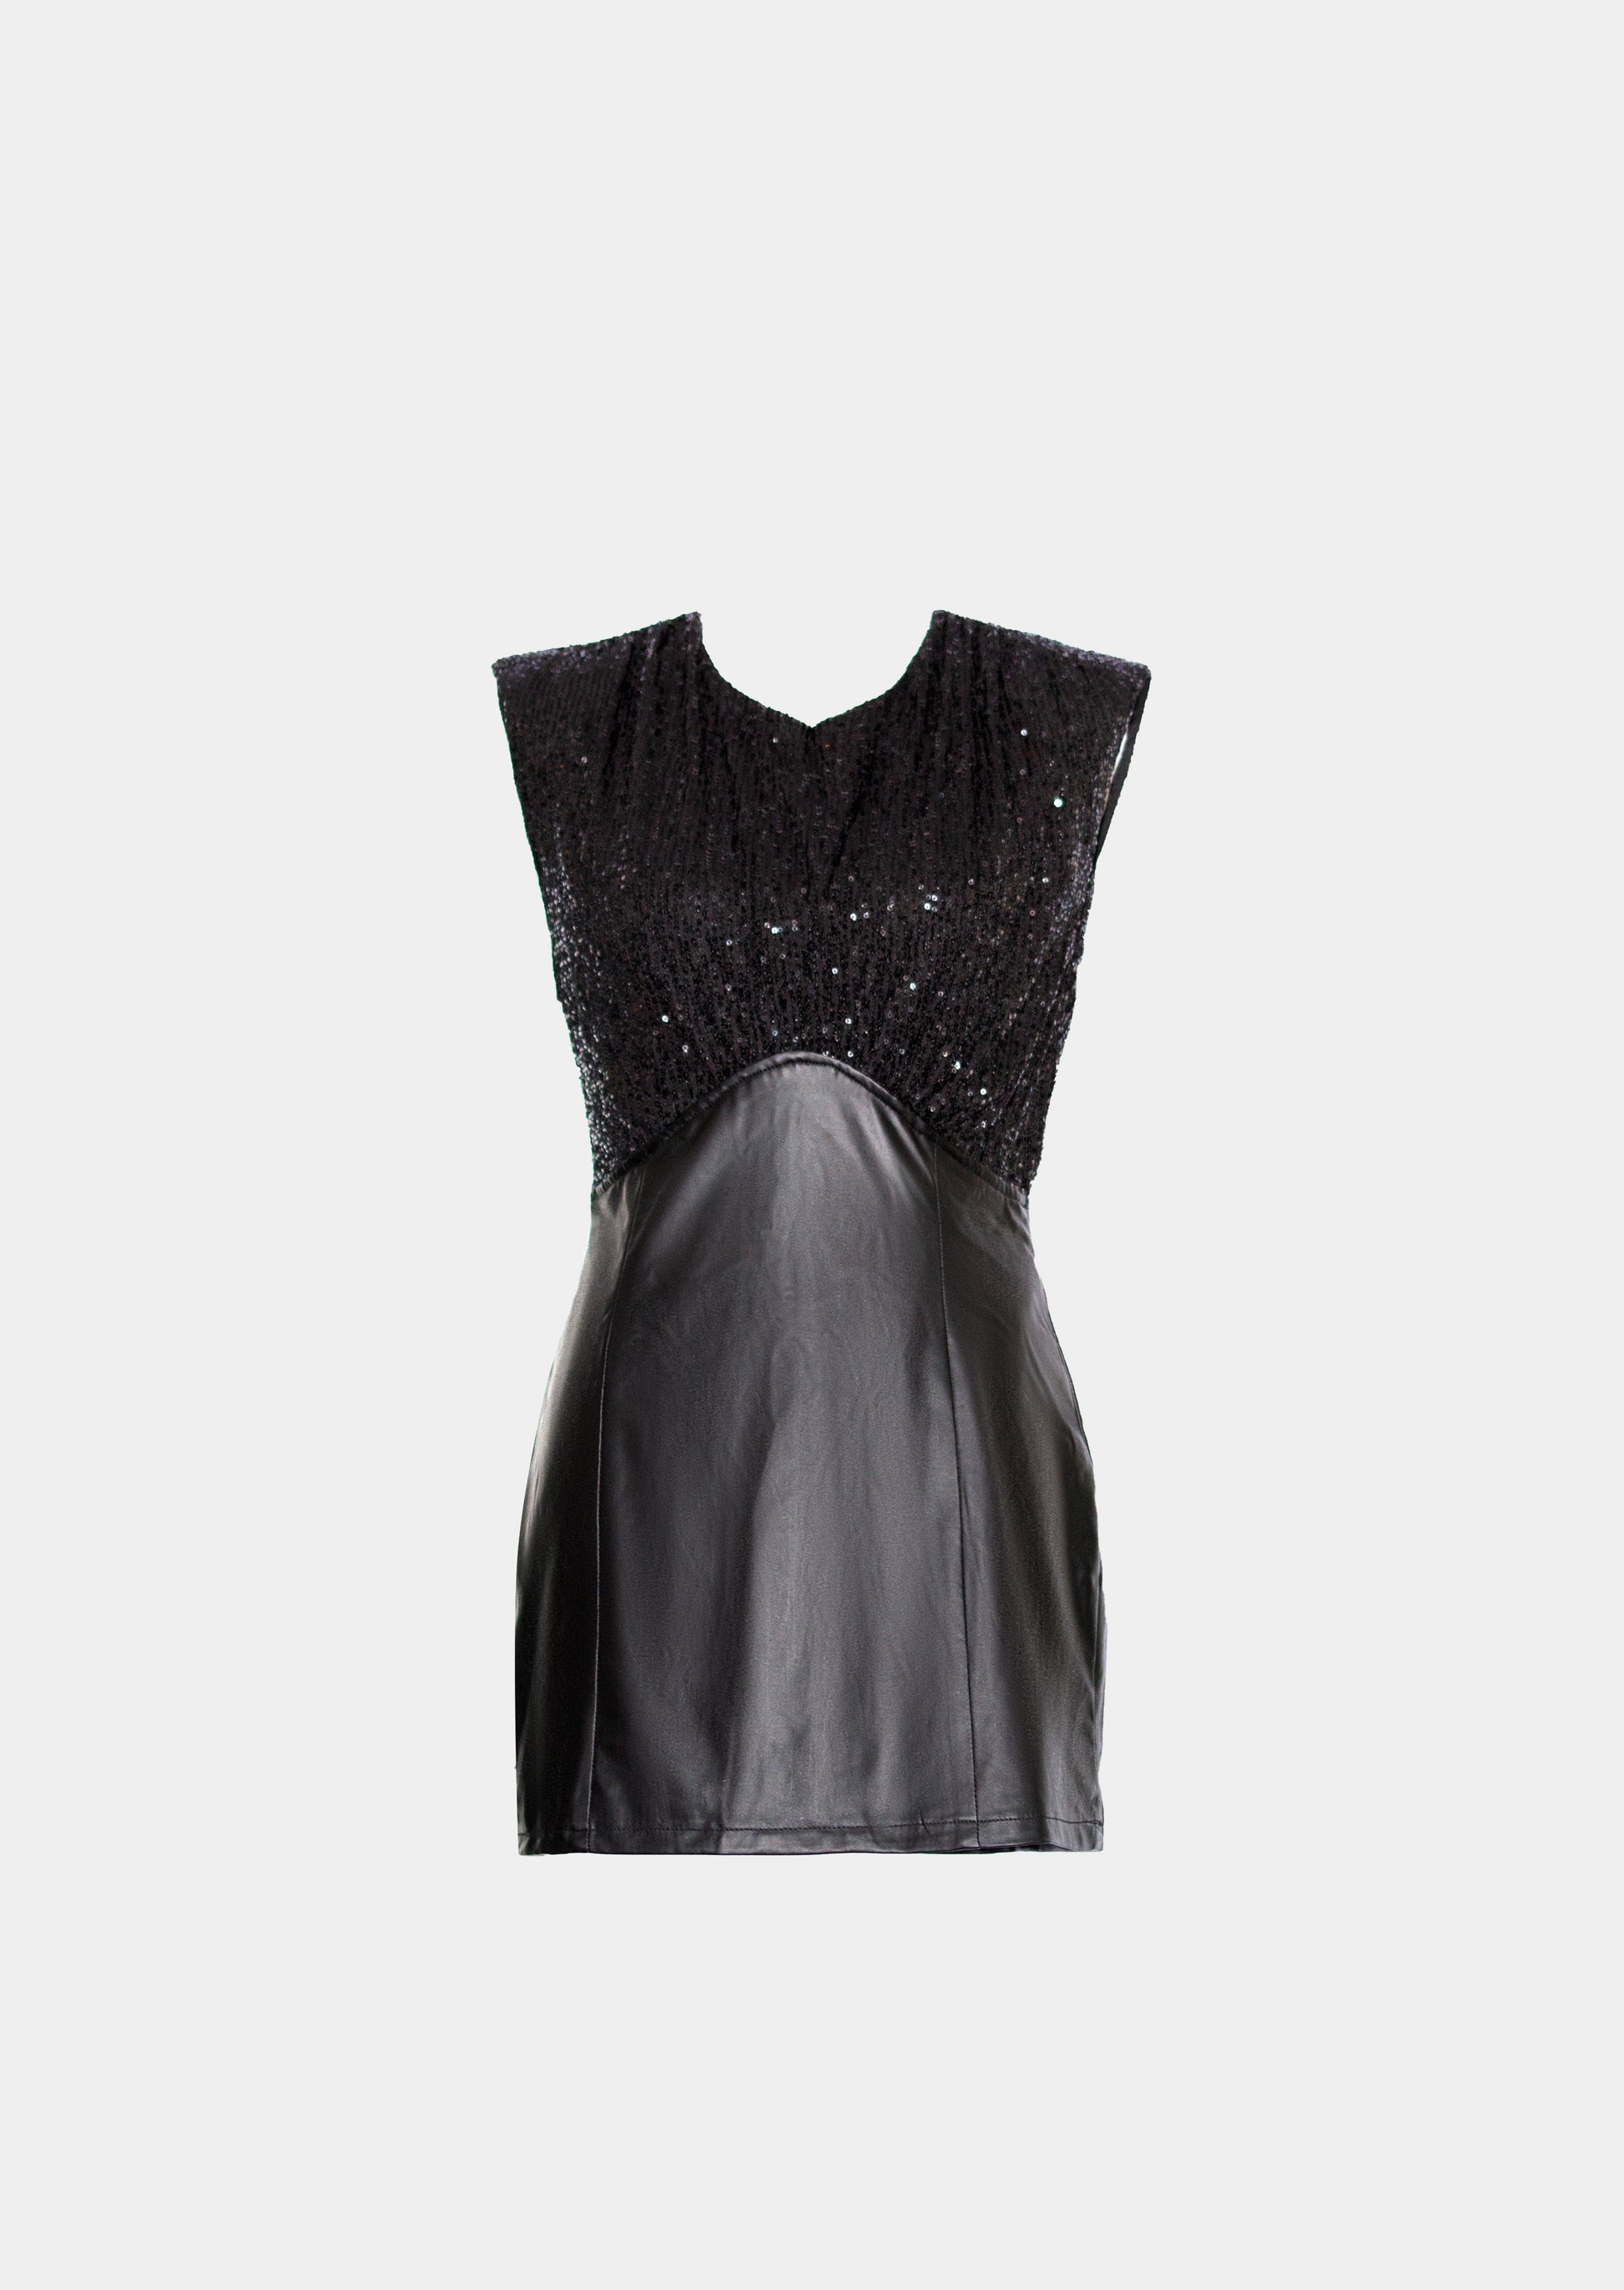 Freshly  and energized , my new black dress. Featuring a black sequin material and faux leather lower part. Ensure you're dressed to impress. My New Little Black Dress